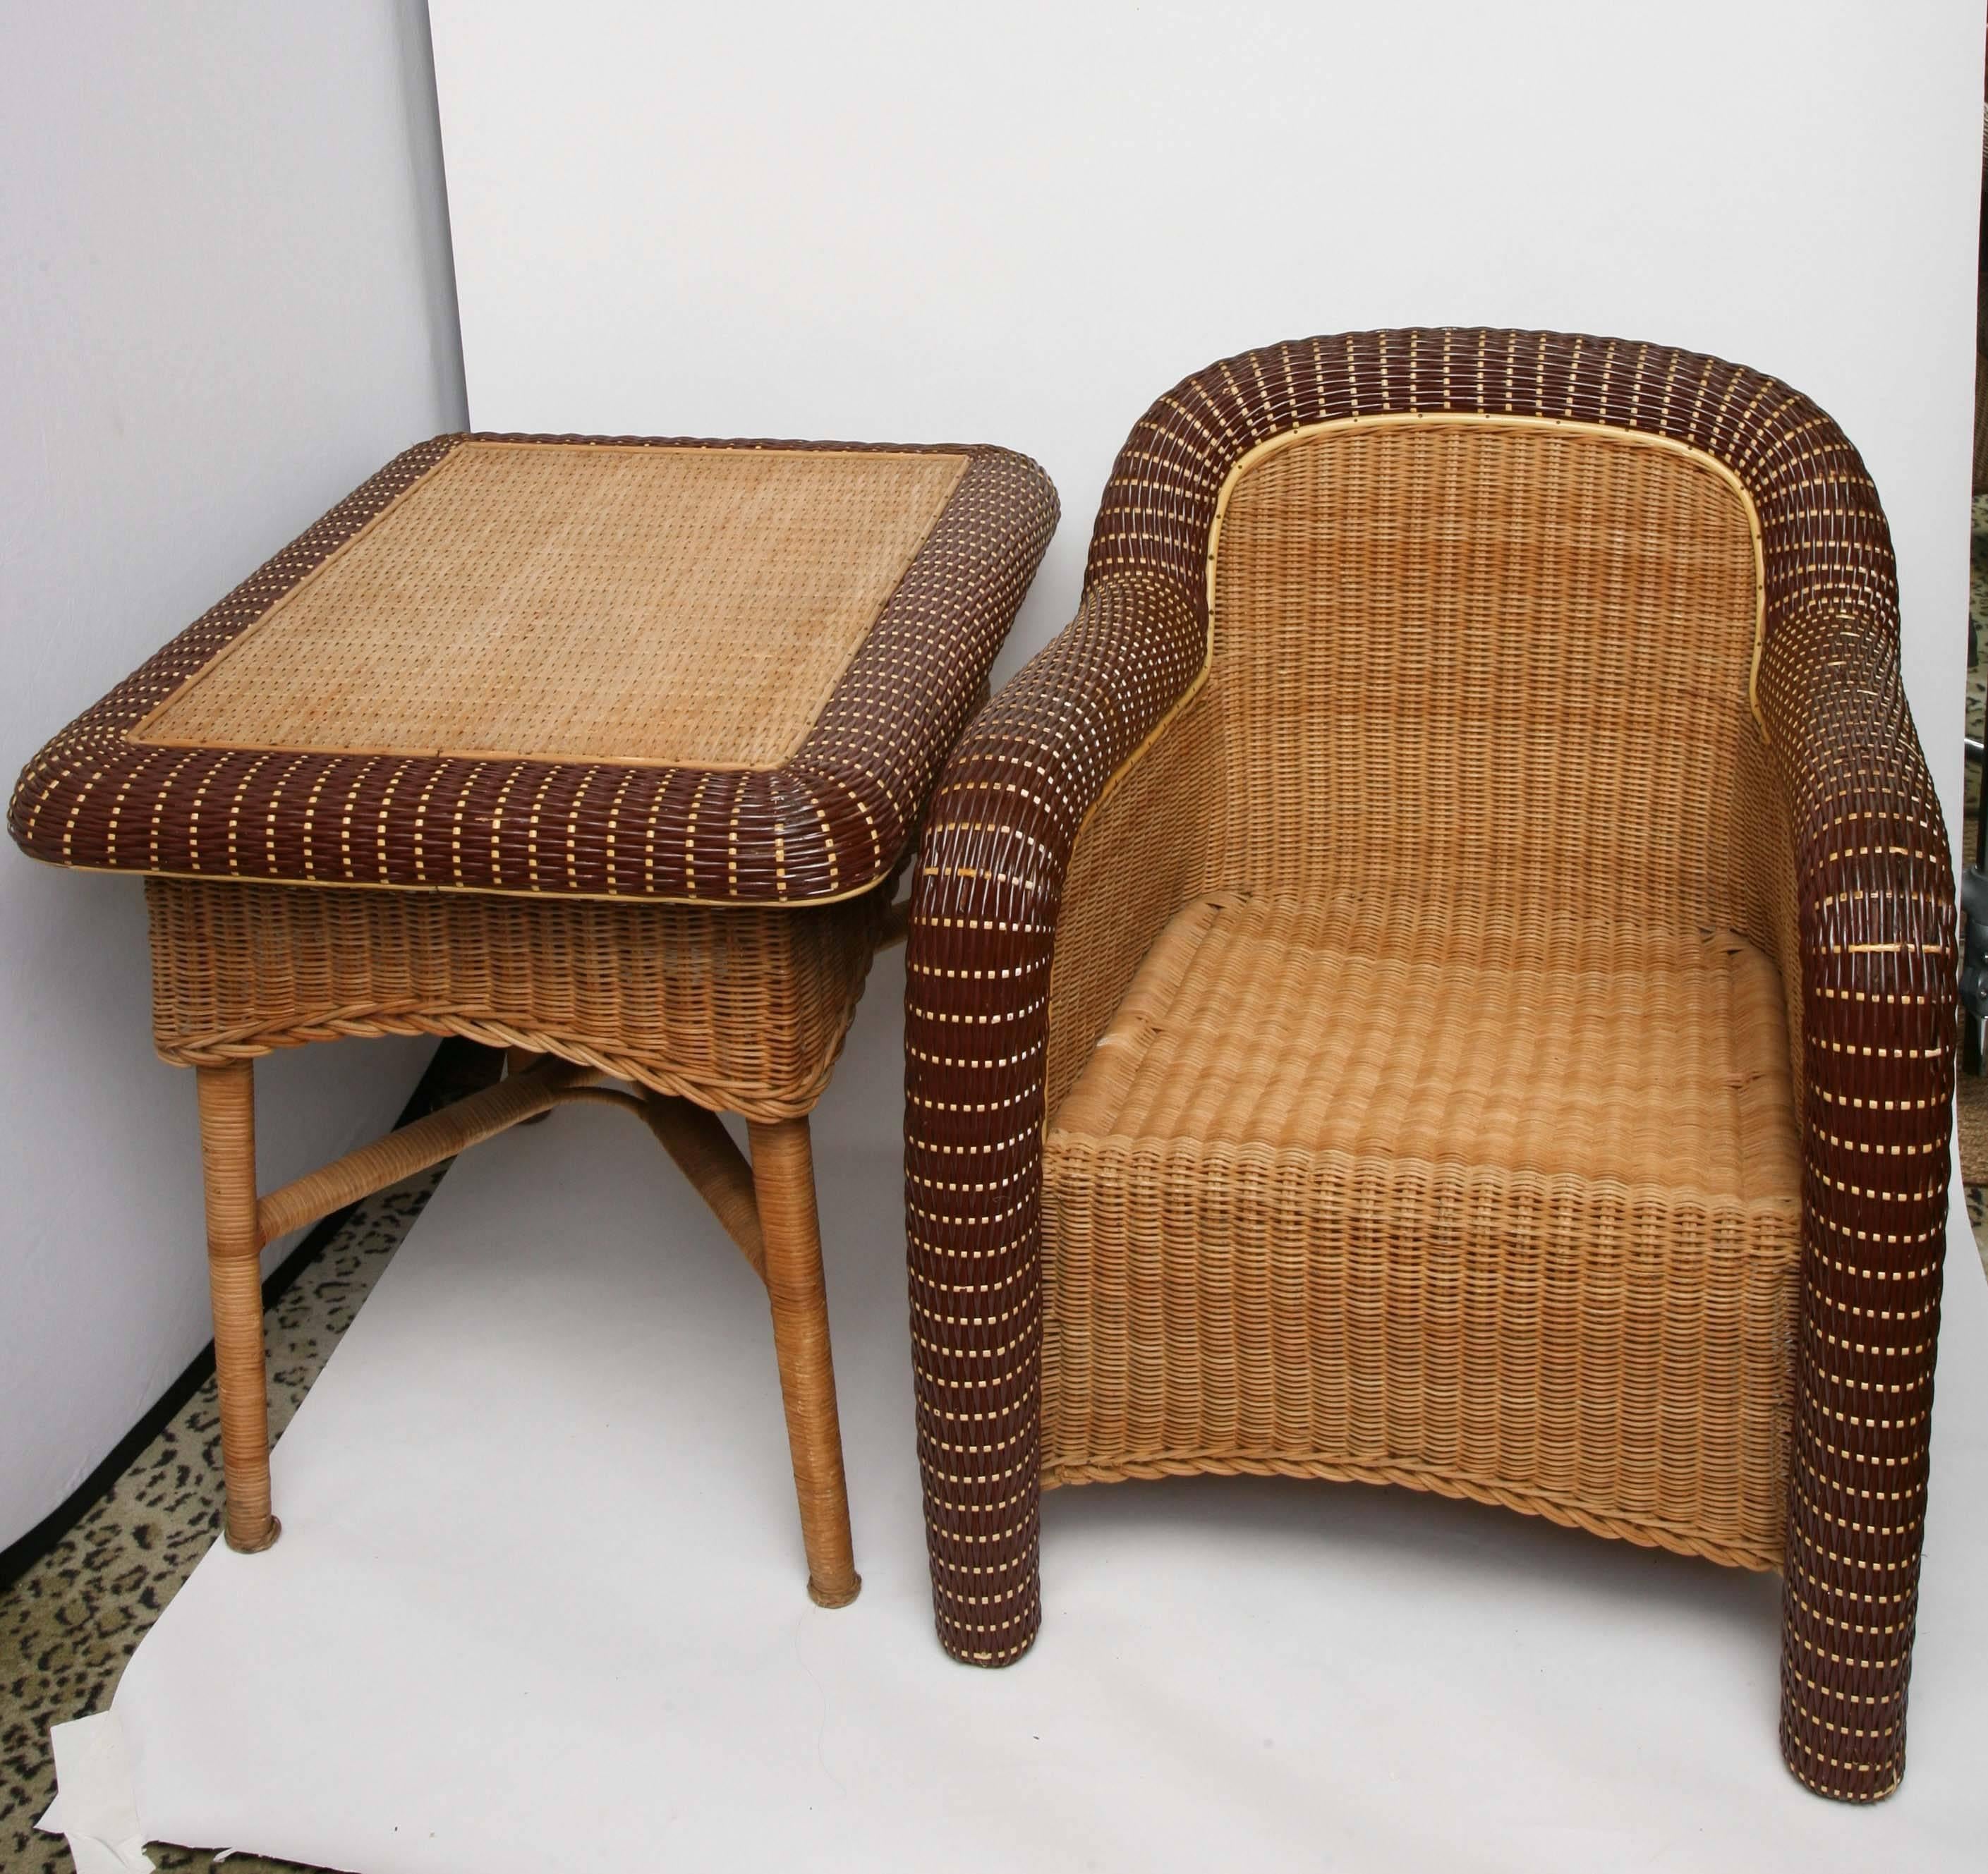 A pair of French brown rattan vintage armchairs with table. Very comfortable! The table size is H 27, W 31, D 23.